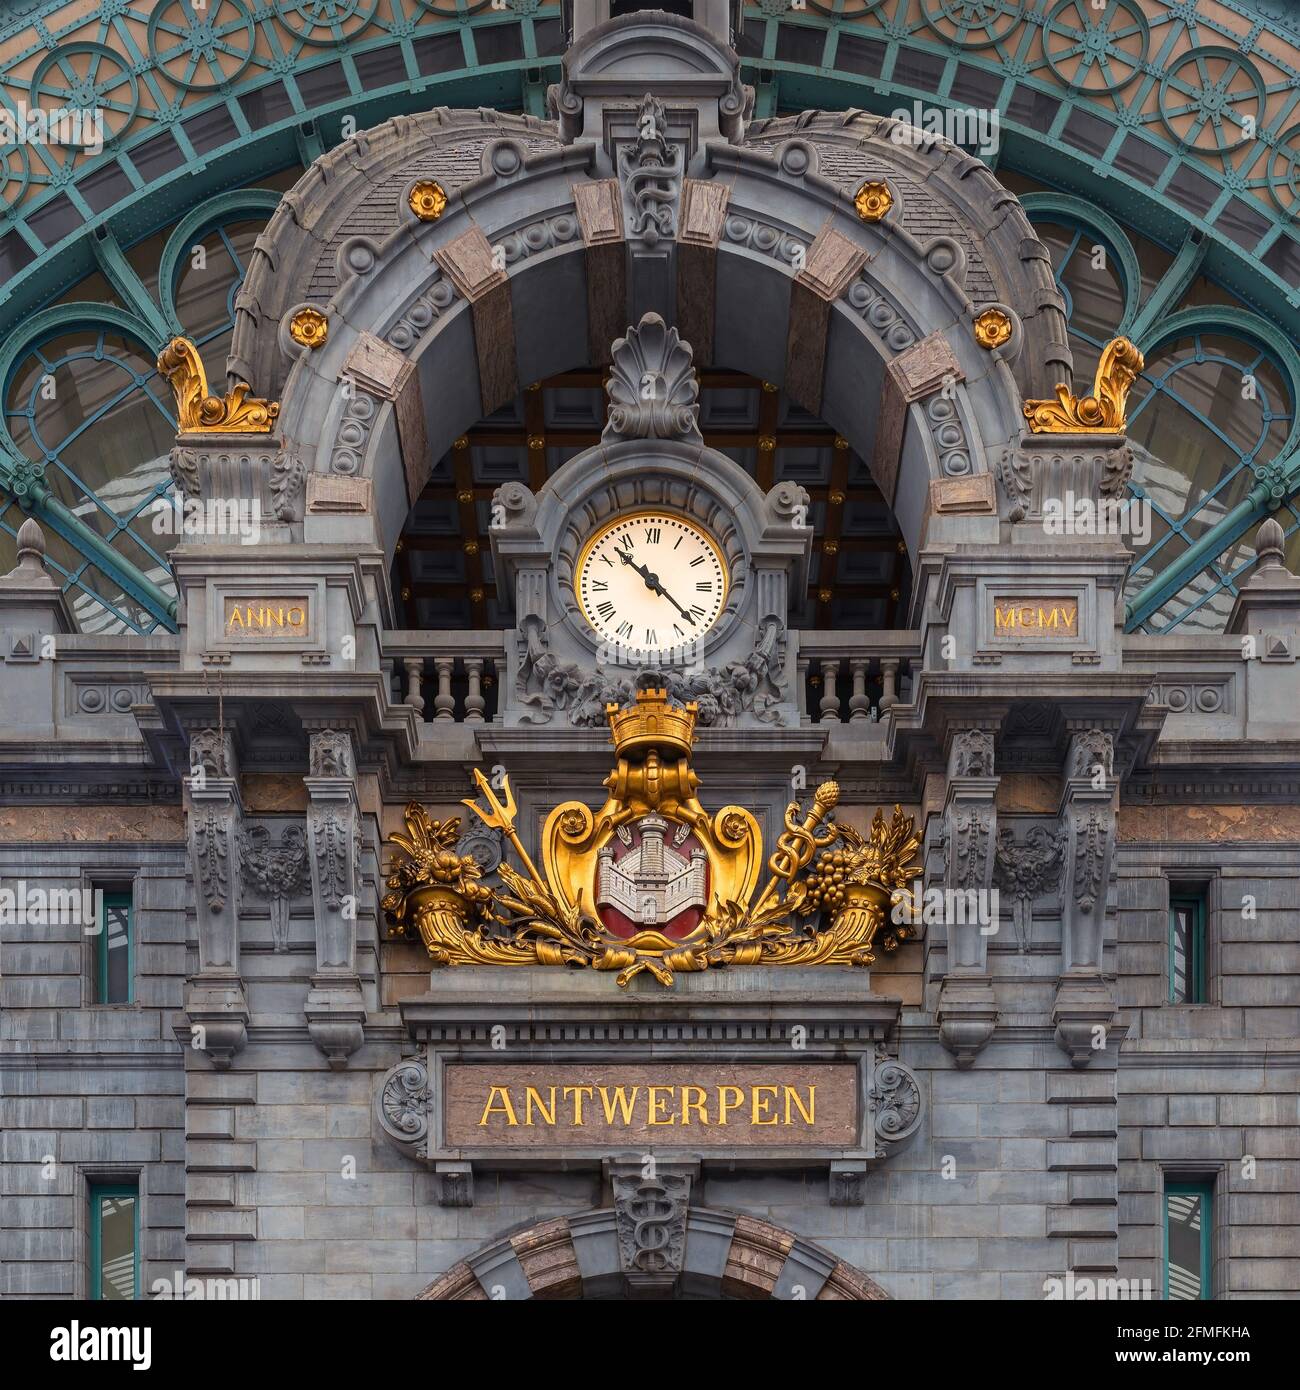 Central Railway Station in Antwerp interior with classical style clock (Centraal Station Antwerpen), Belgium. Stock Photo